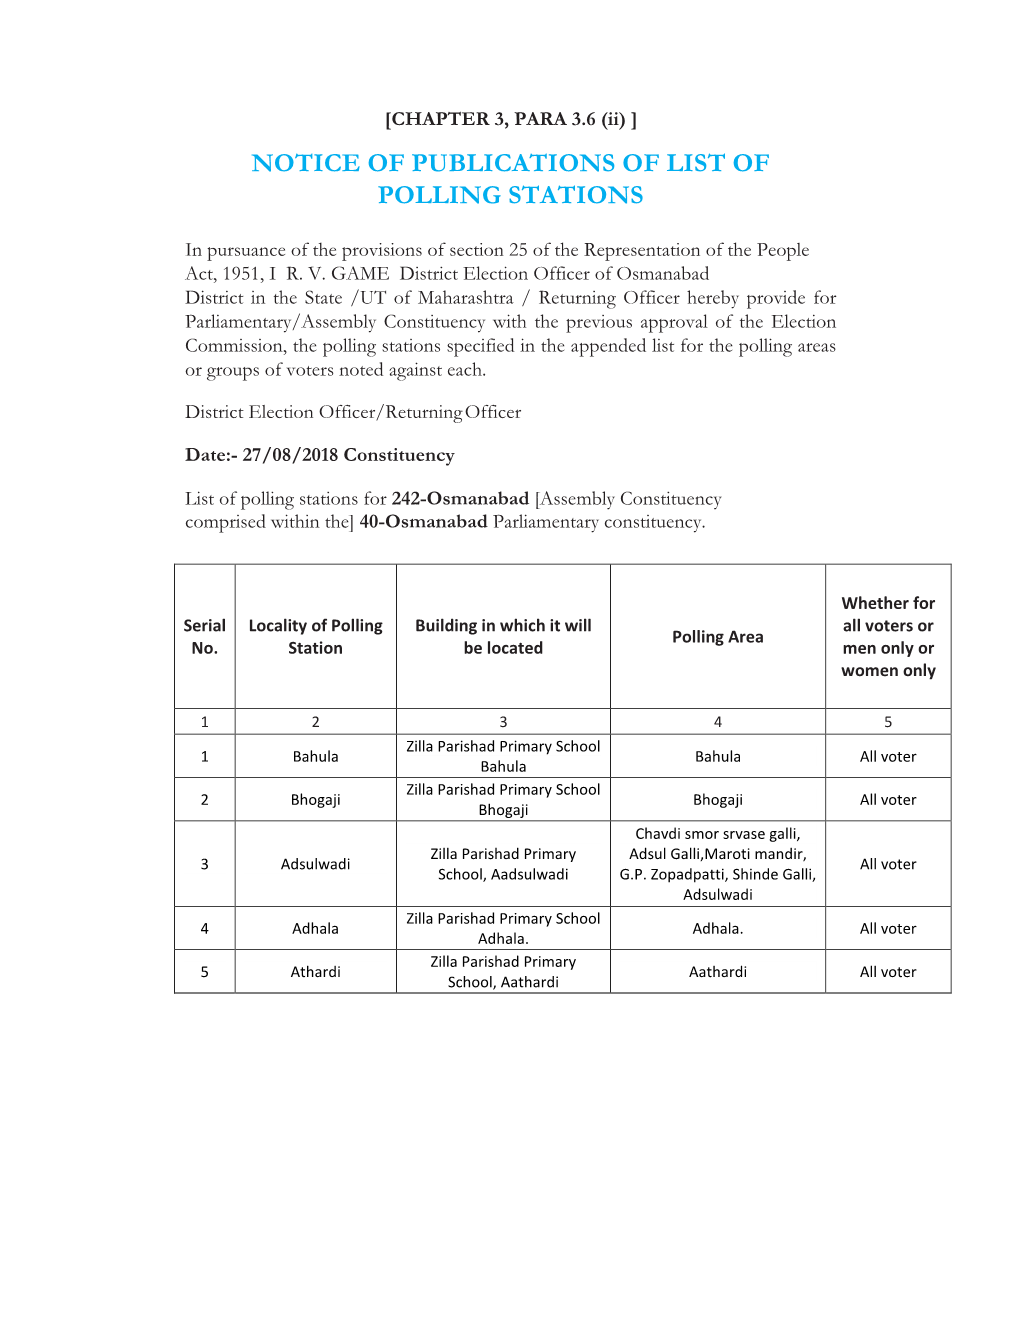 Notice of Publications of List of Polling Stations